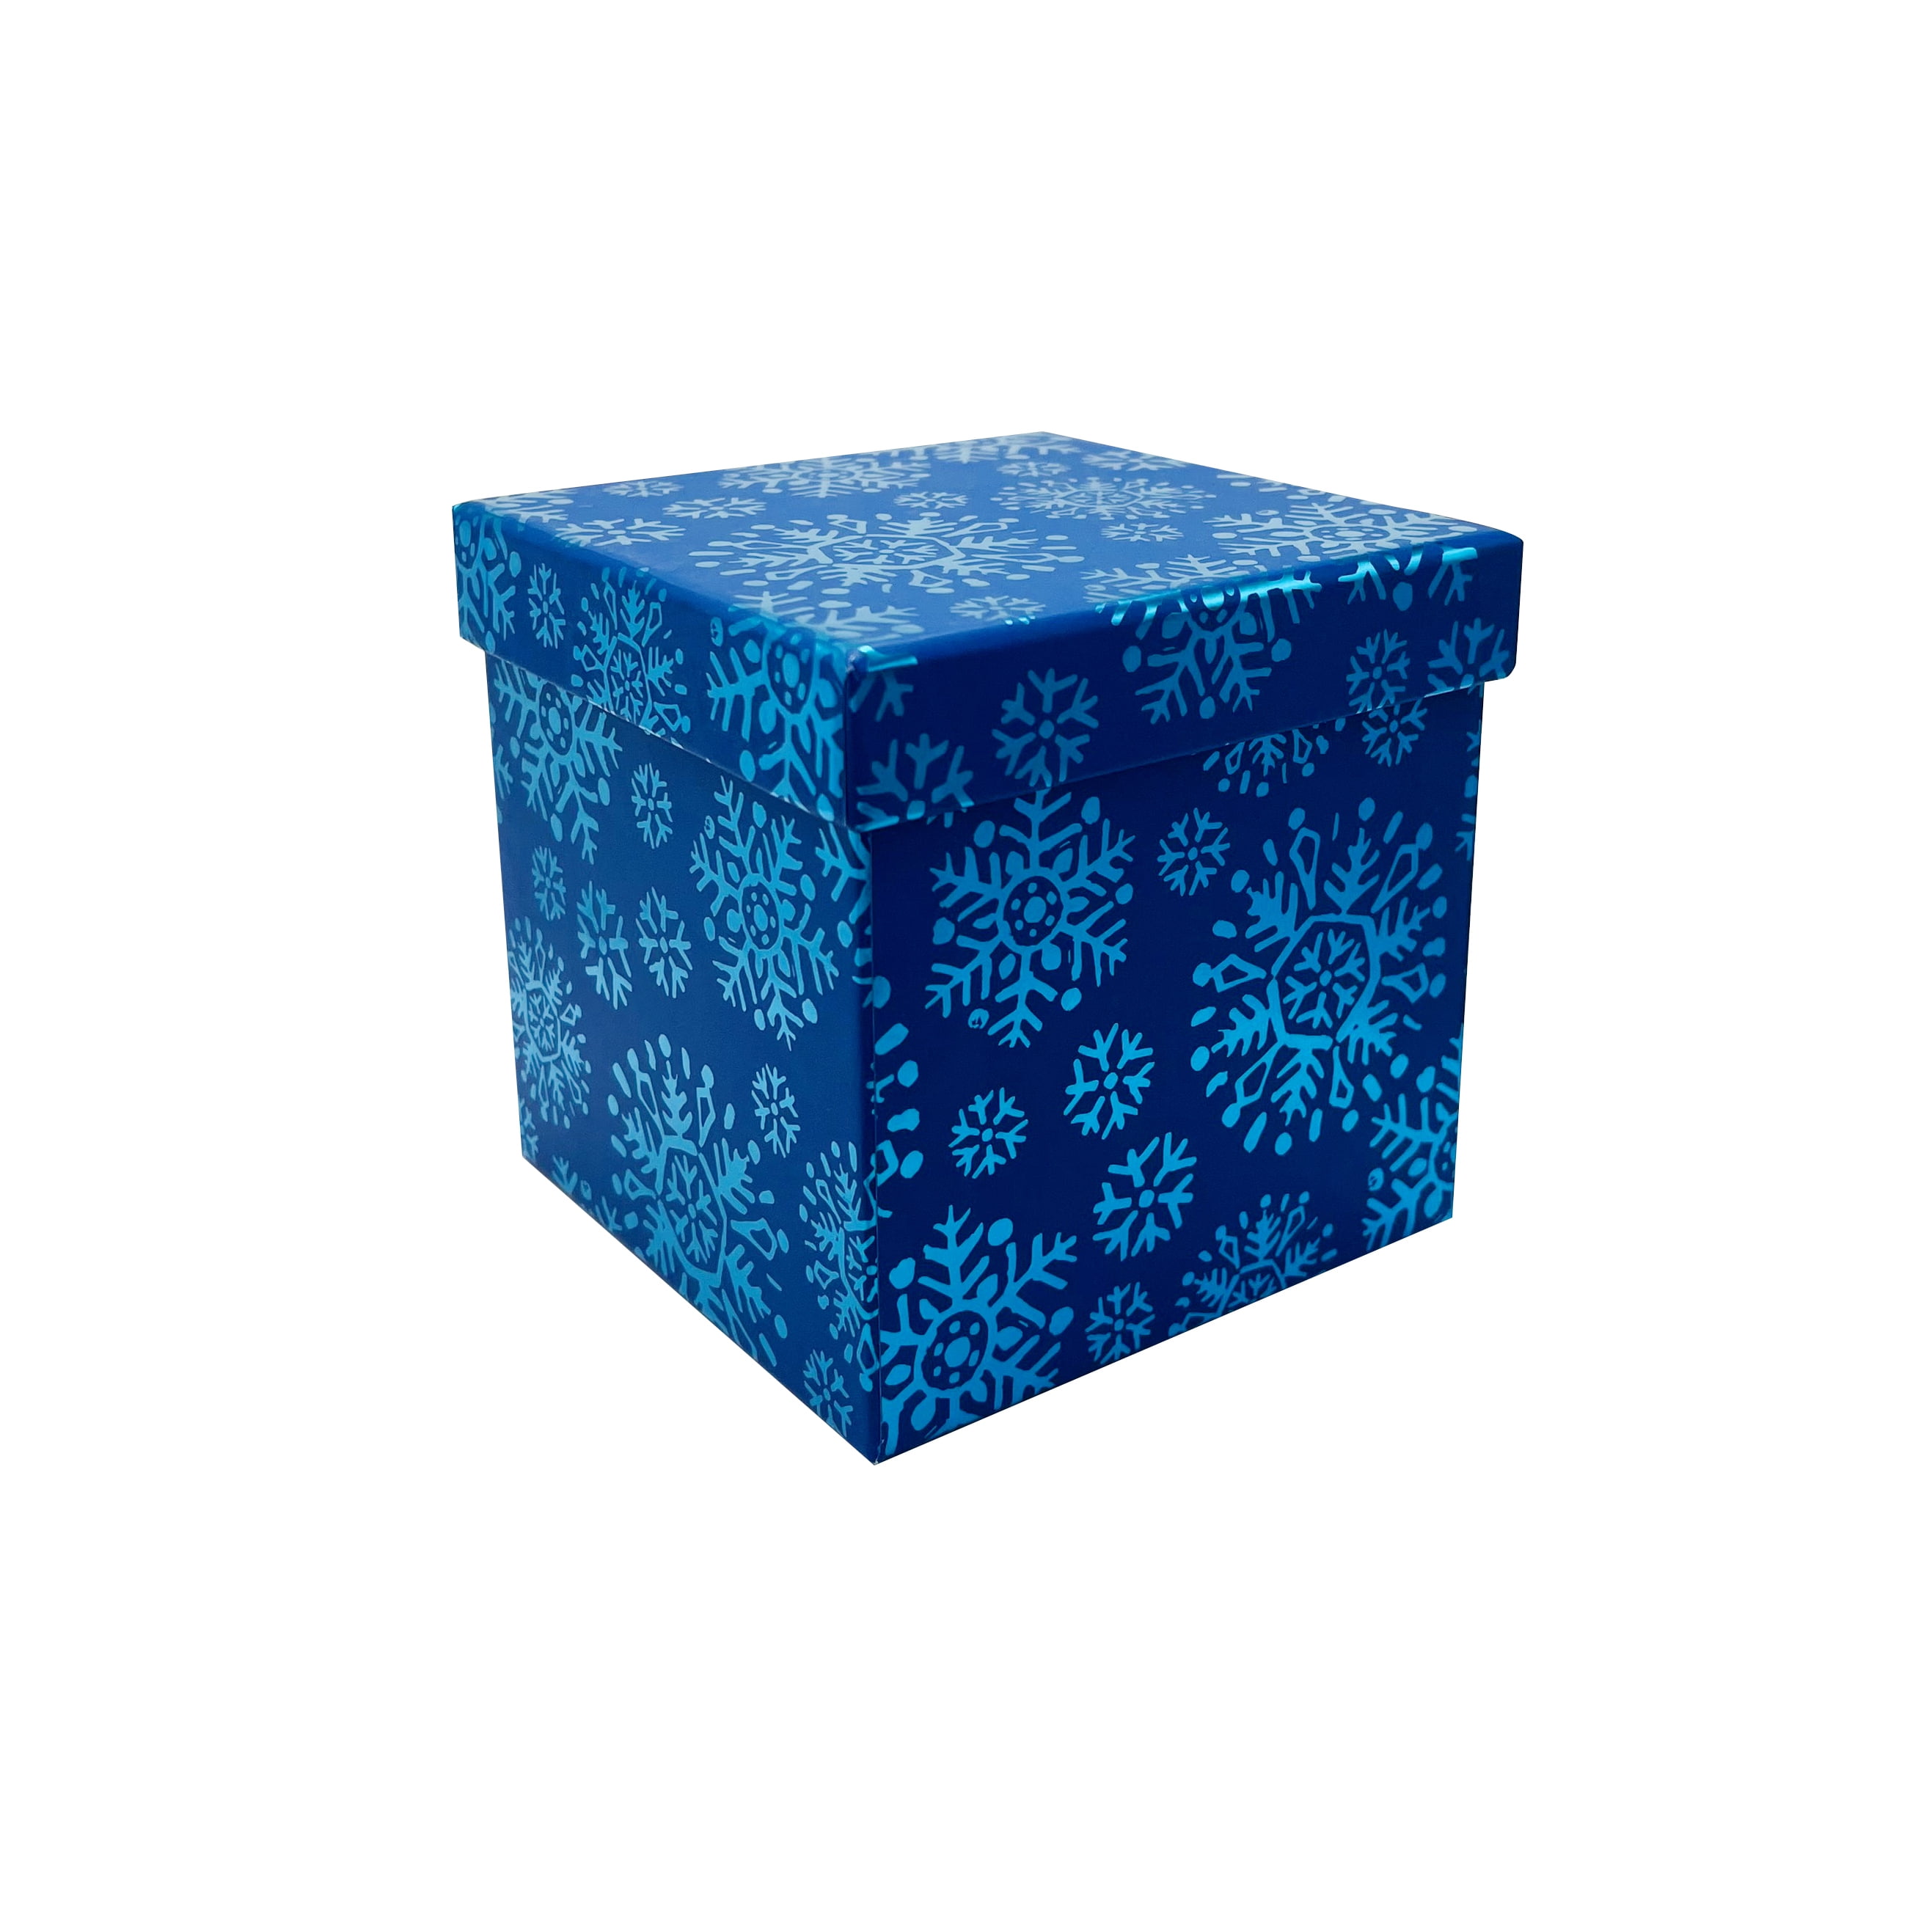 Holiday Time Christmas Gift Square Box, 3 inches, Blue Holo Snowflake